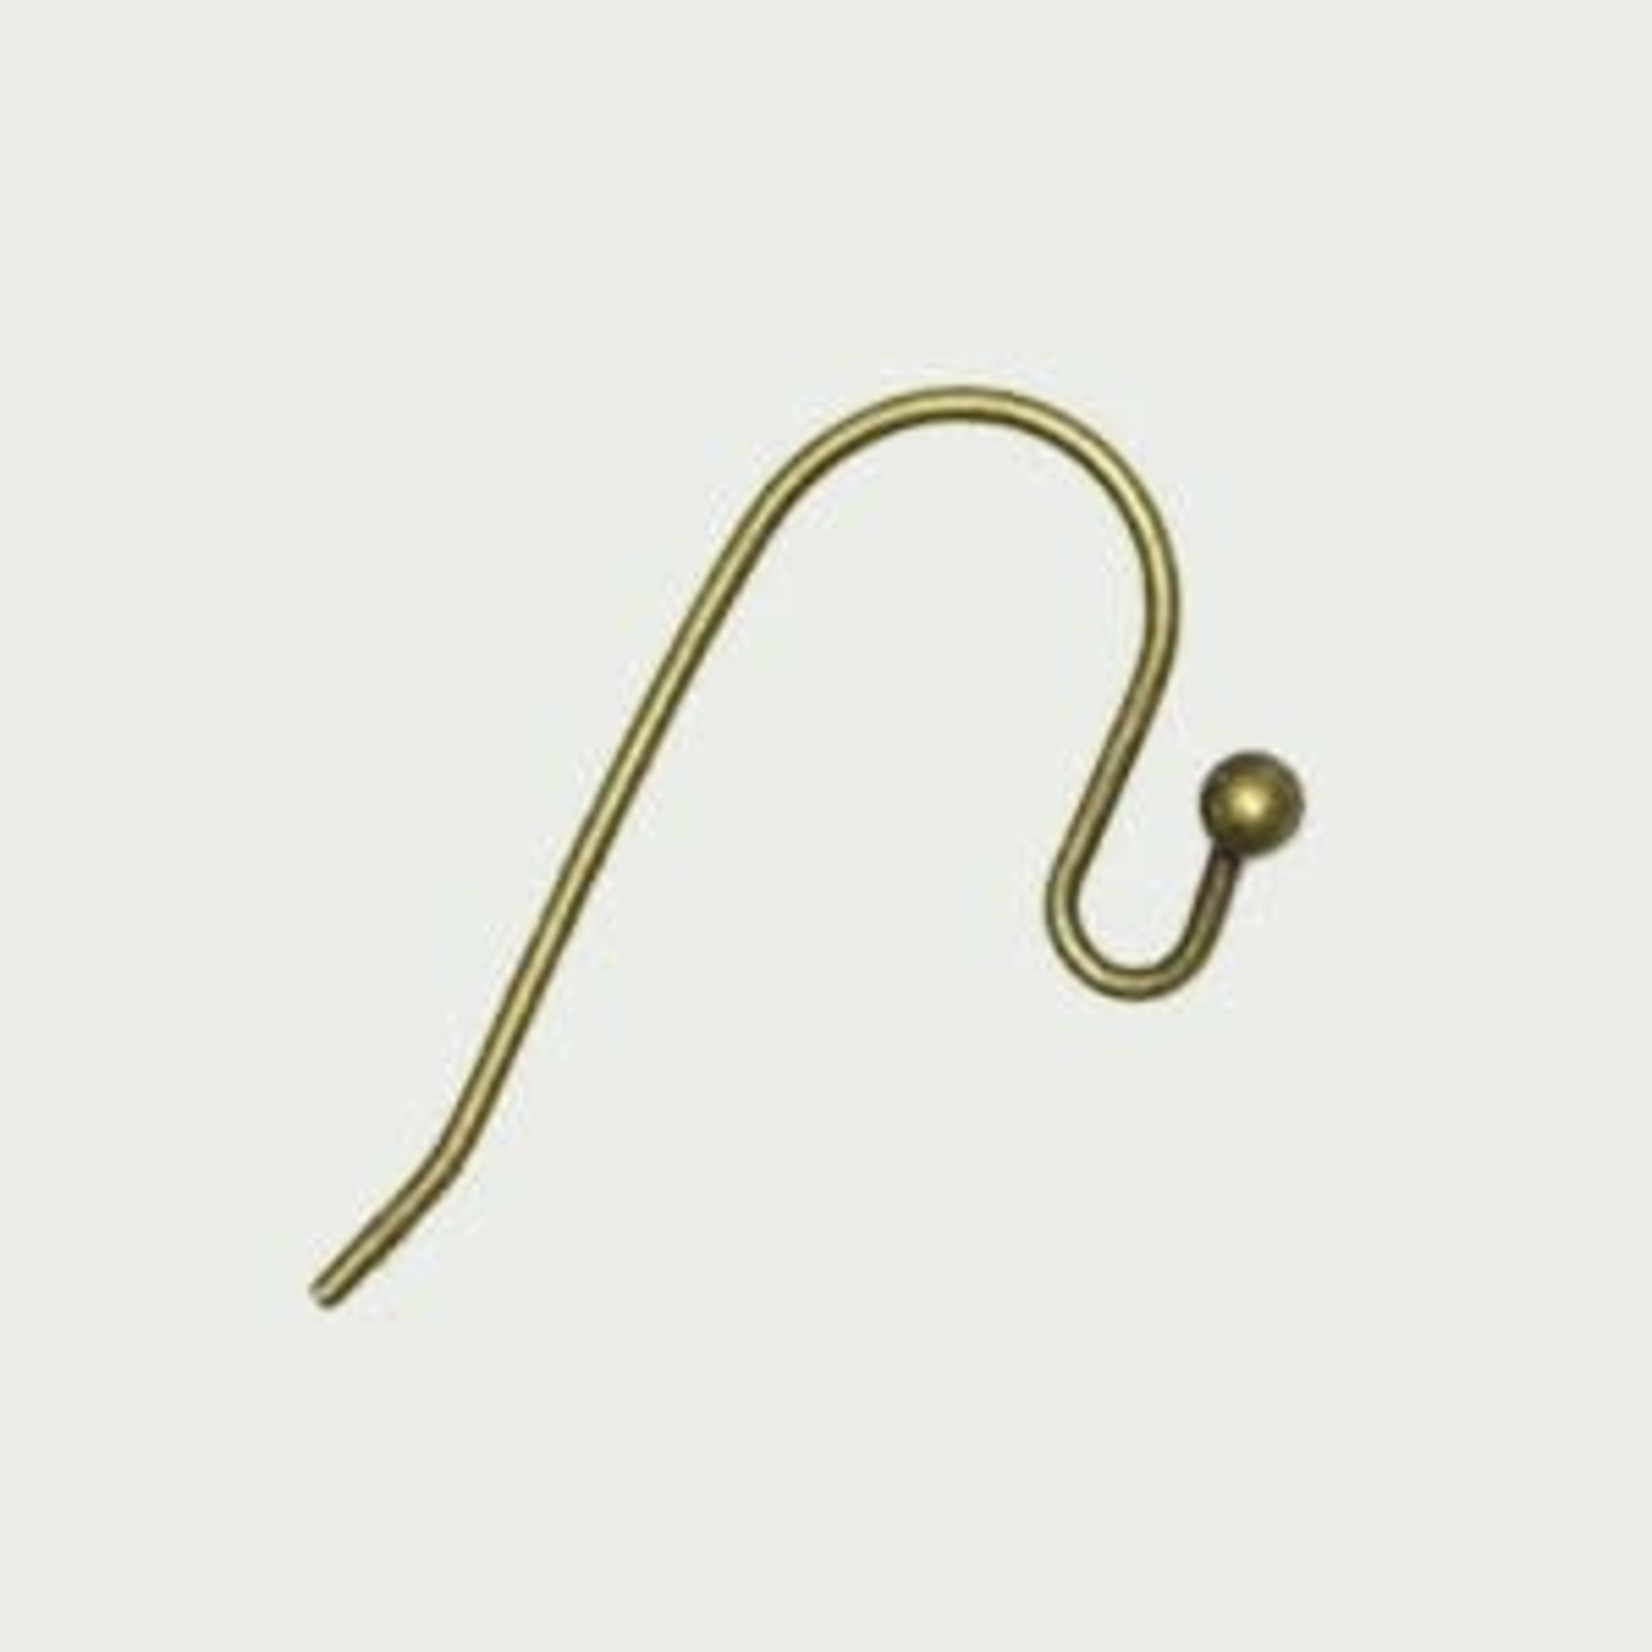 French Earwire Nickel-Free Antique Brass Plated - 50 pieces